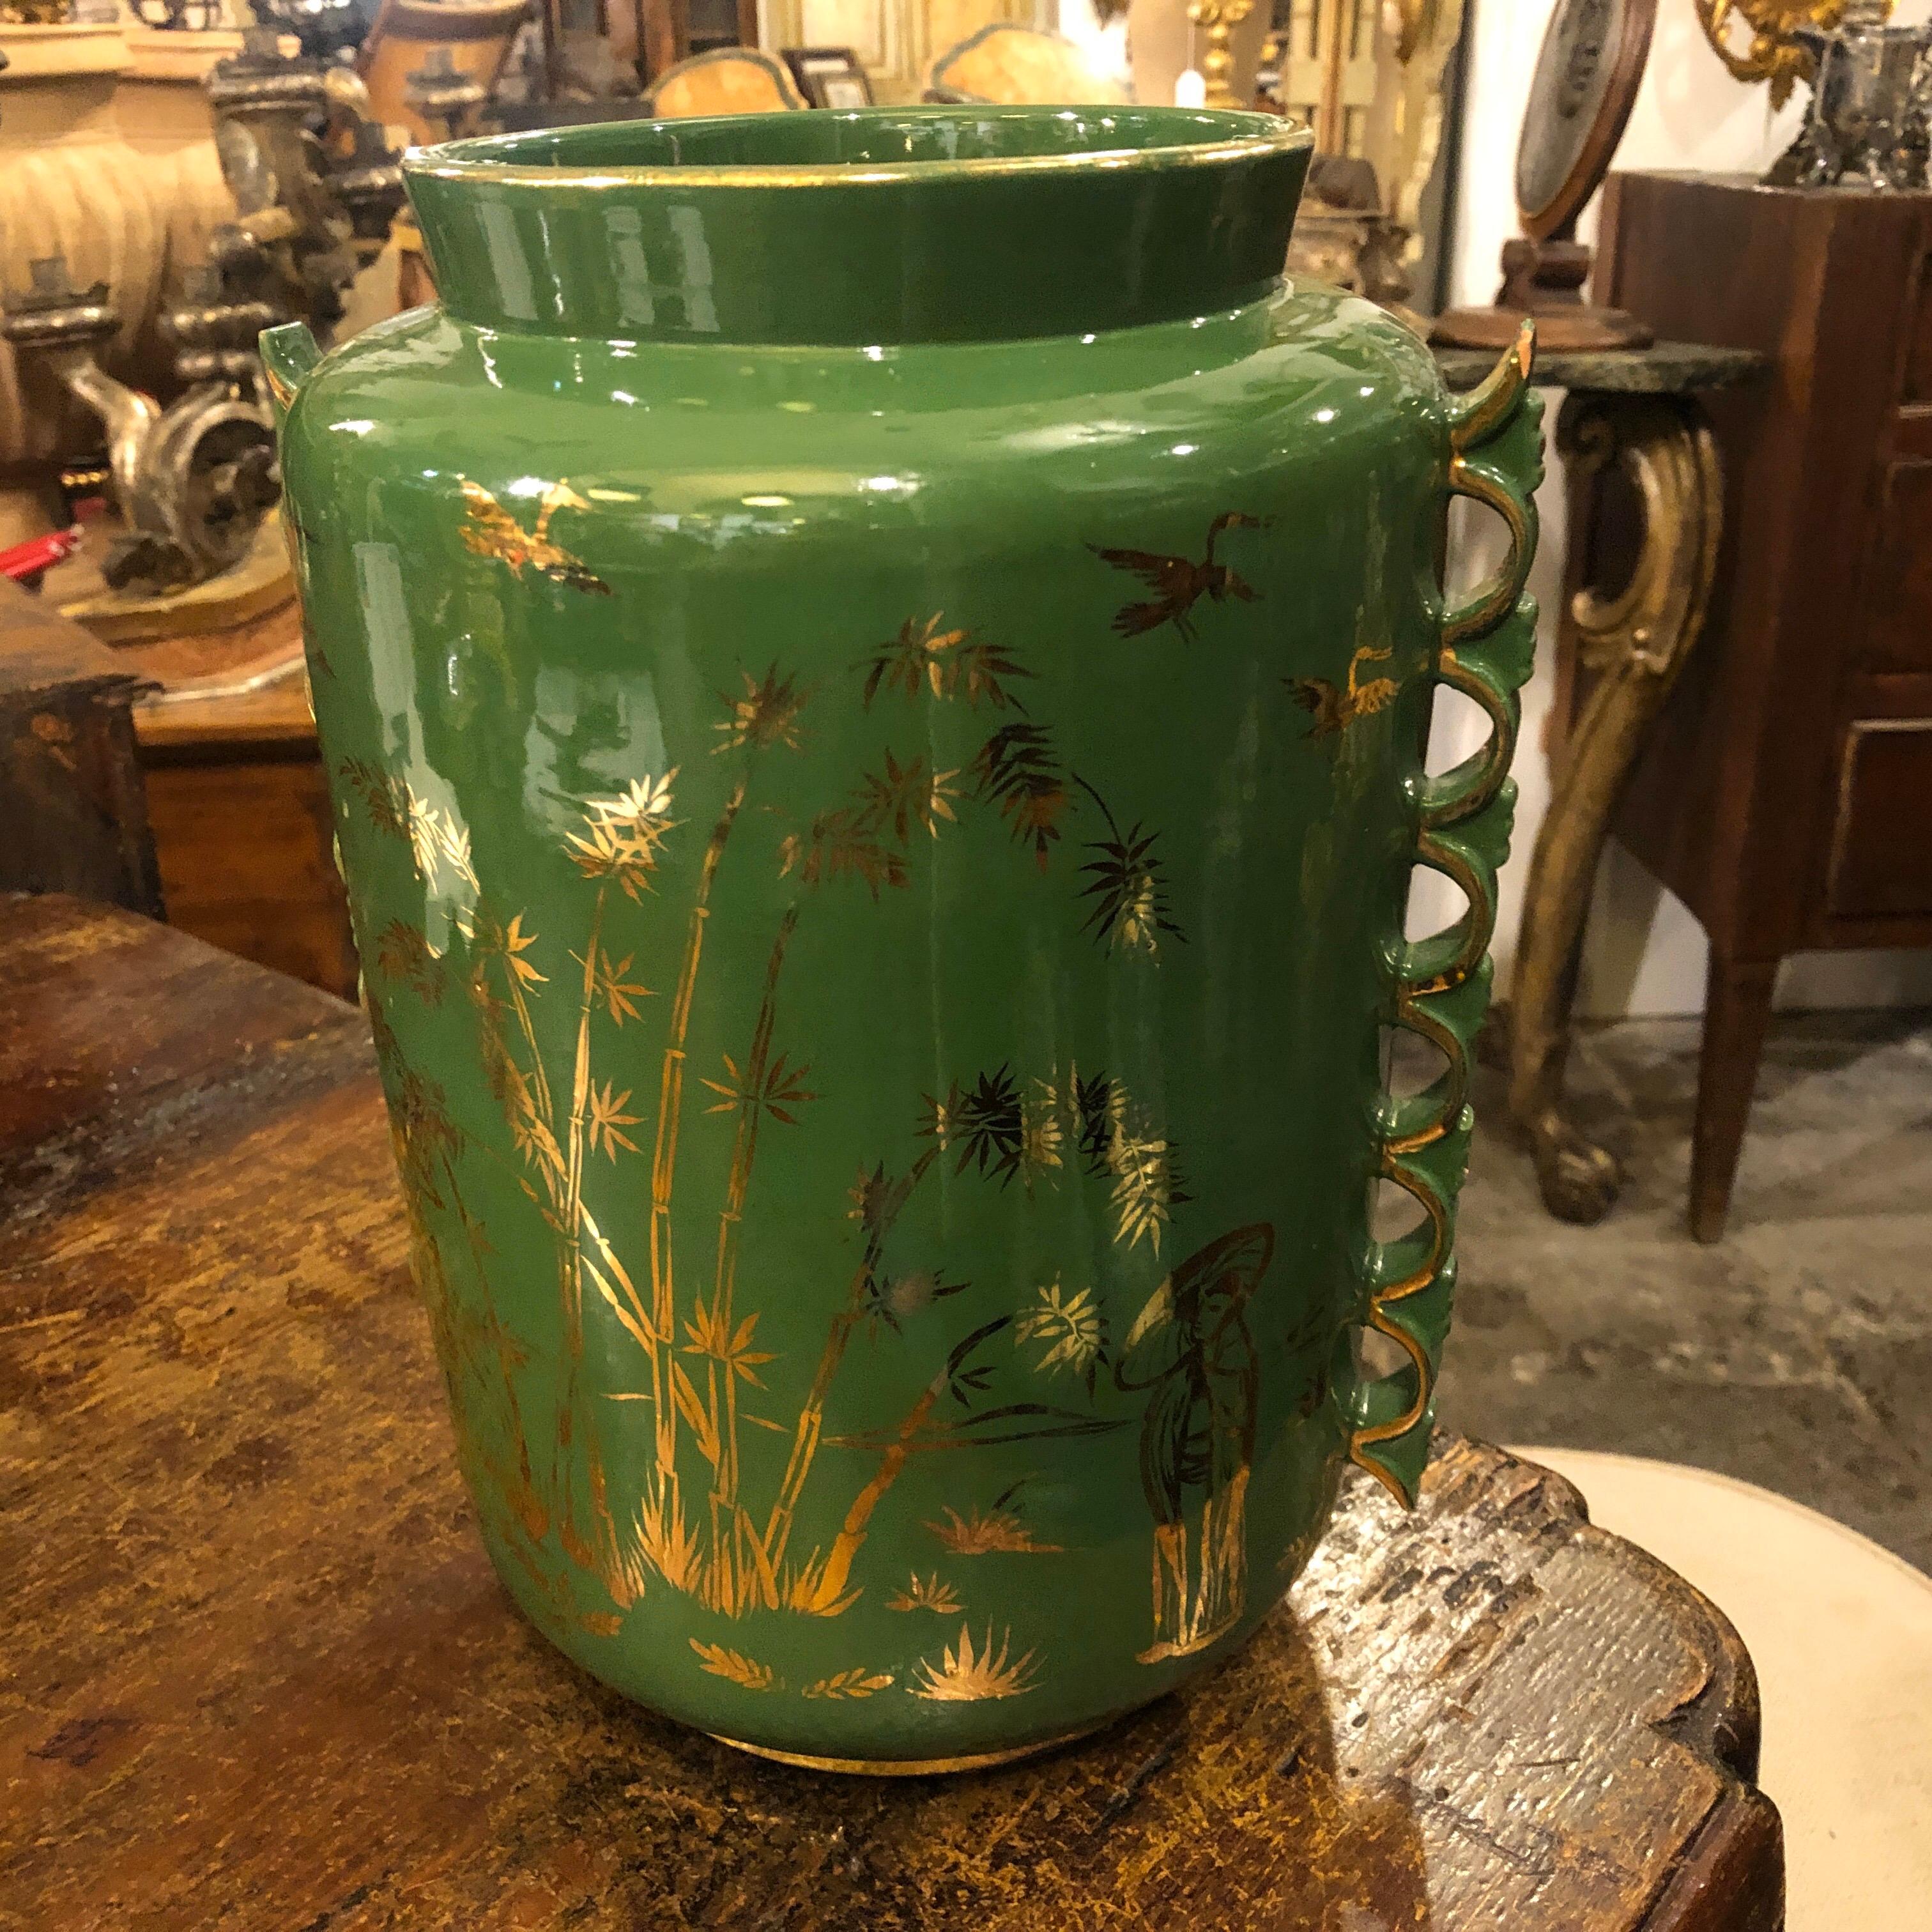 An oriental decorated vase made in Italy in the 1960s. Green and gold ceramic is in good condition. Only a little chip on the bottom not visible. Attributed to Italo Casini.